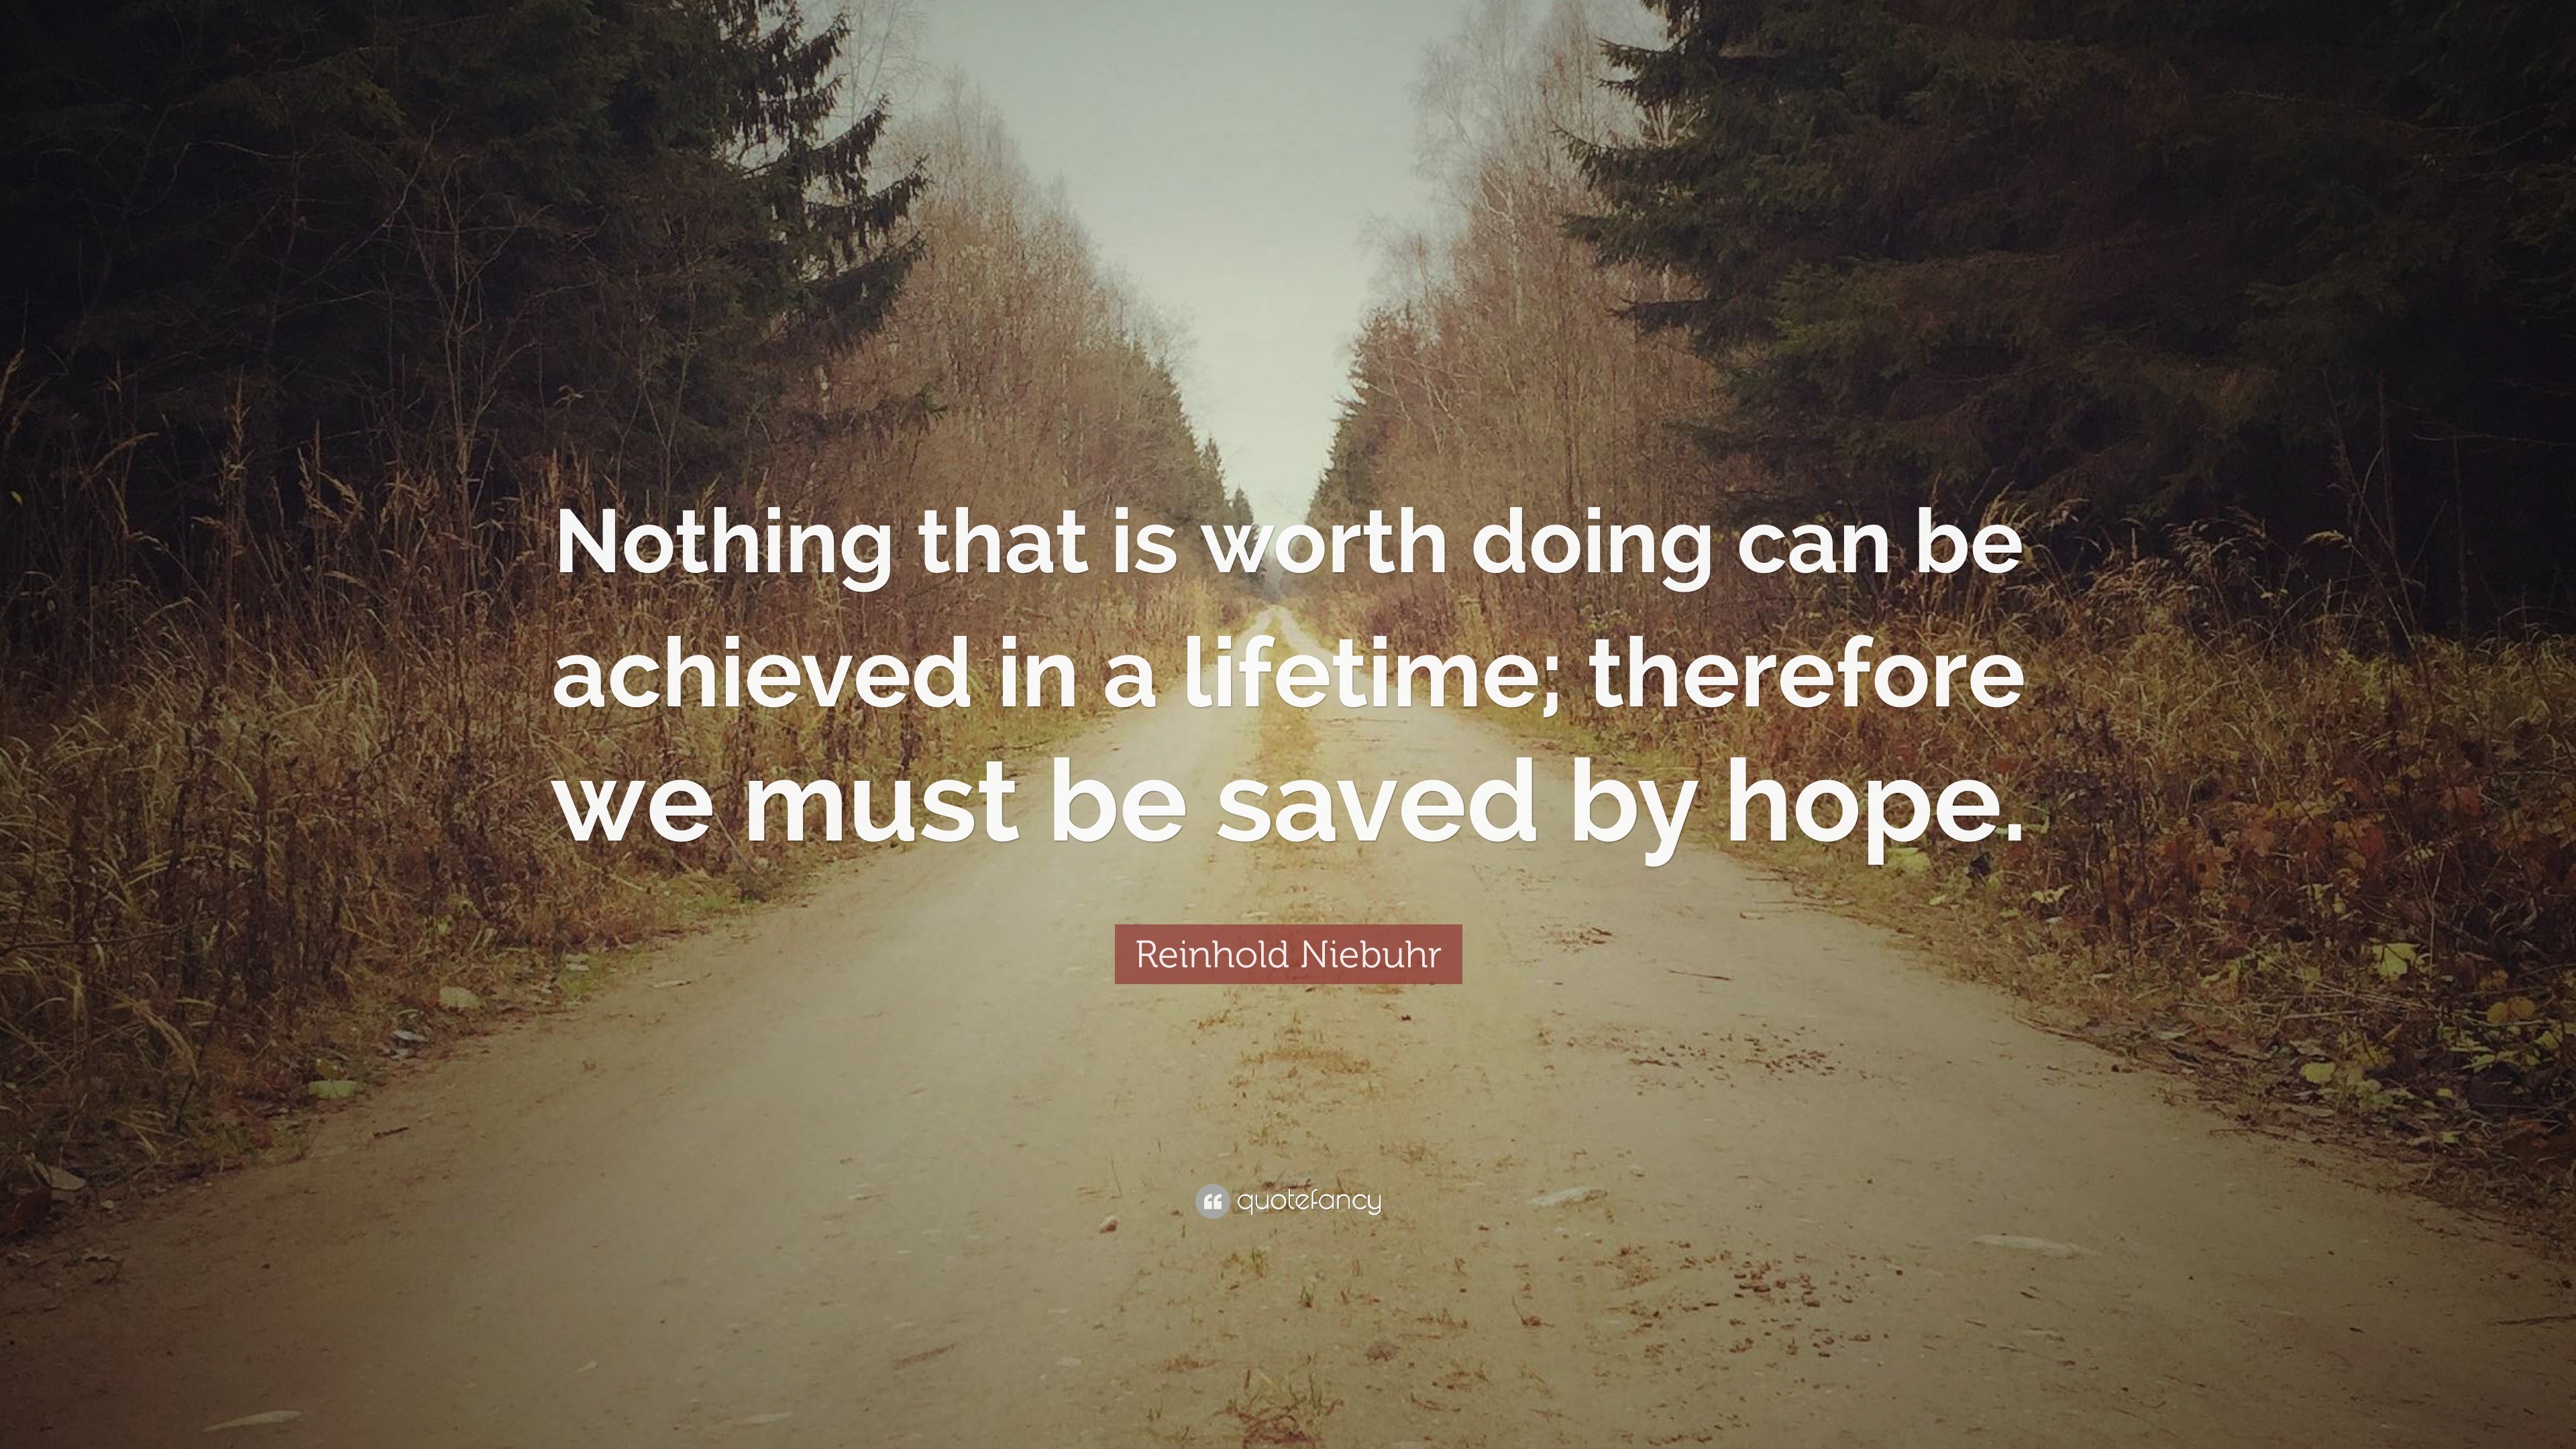 Reinhold Niebuhr Quote: Nothing that is worth doing can be achieved in